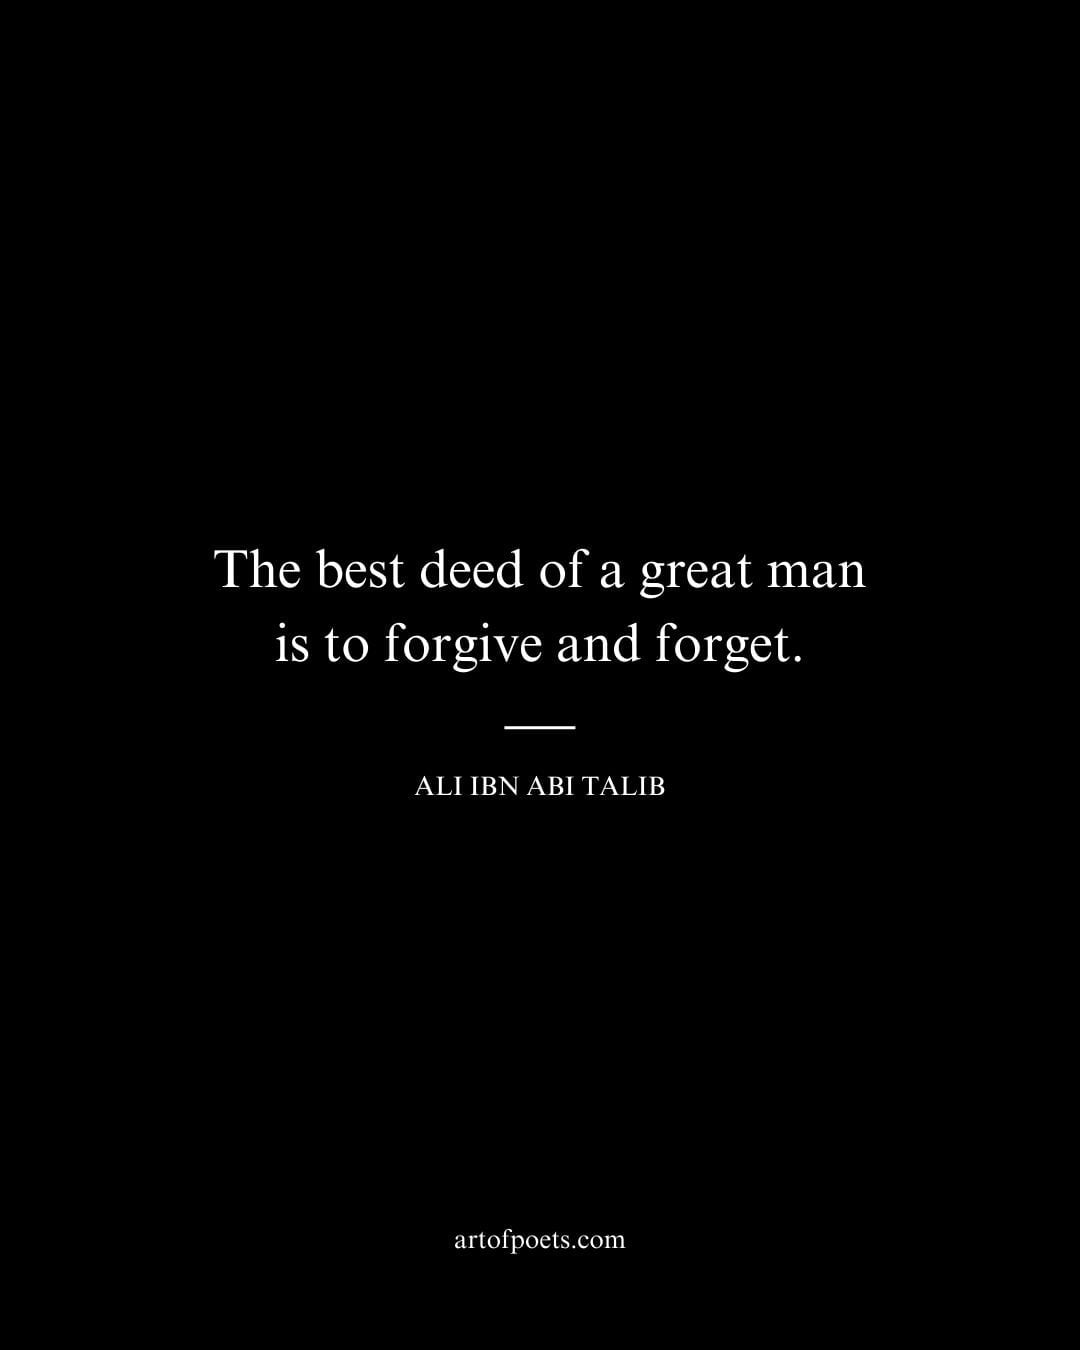 The best deed of a great man is to forgive and forget